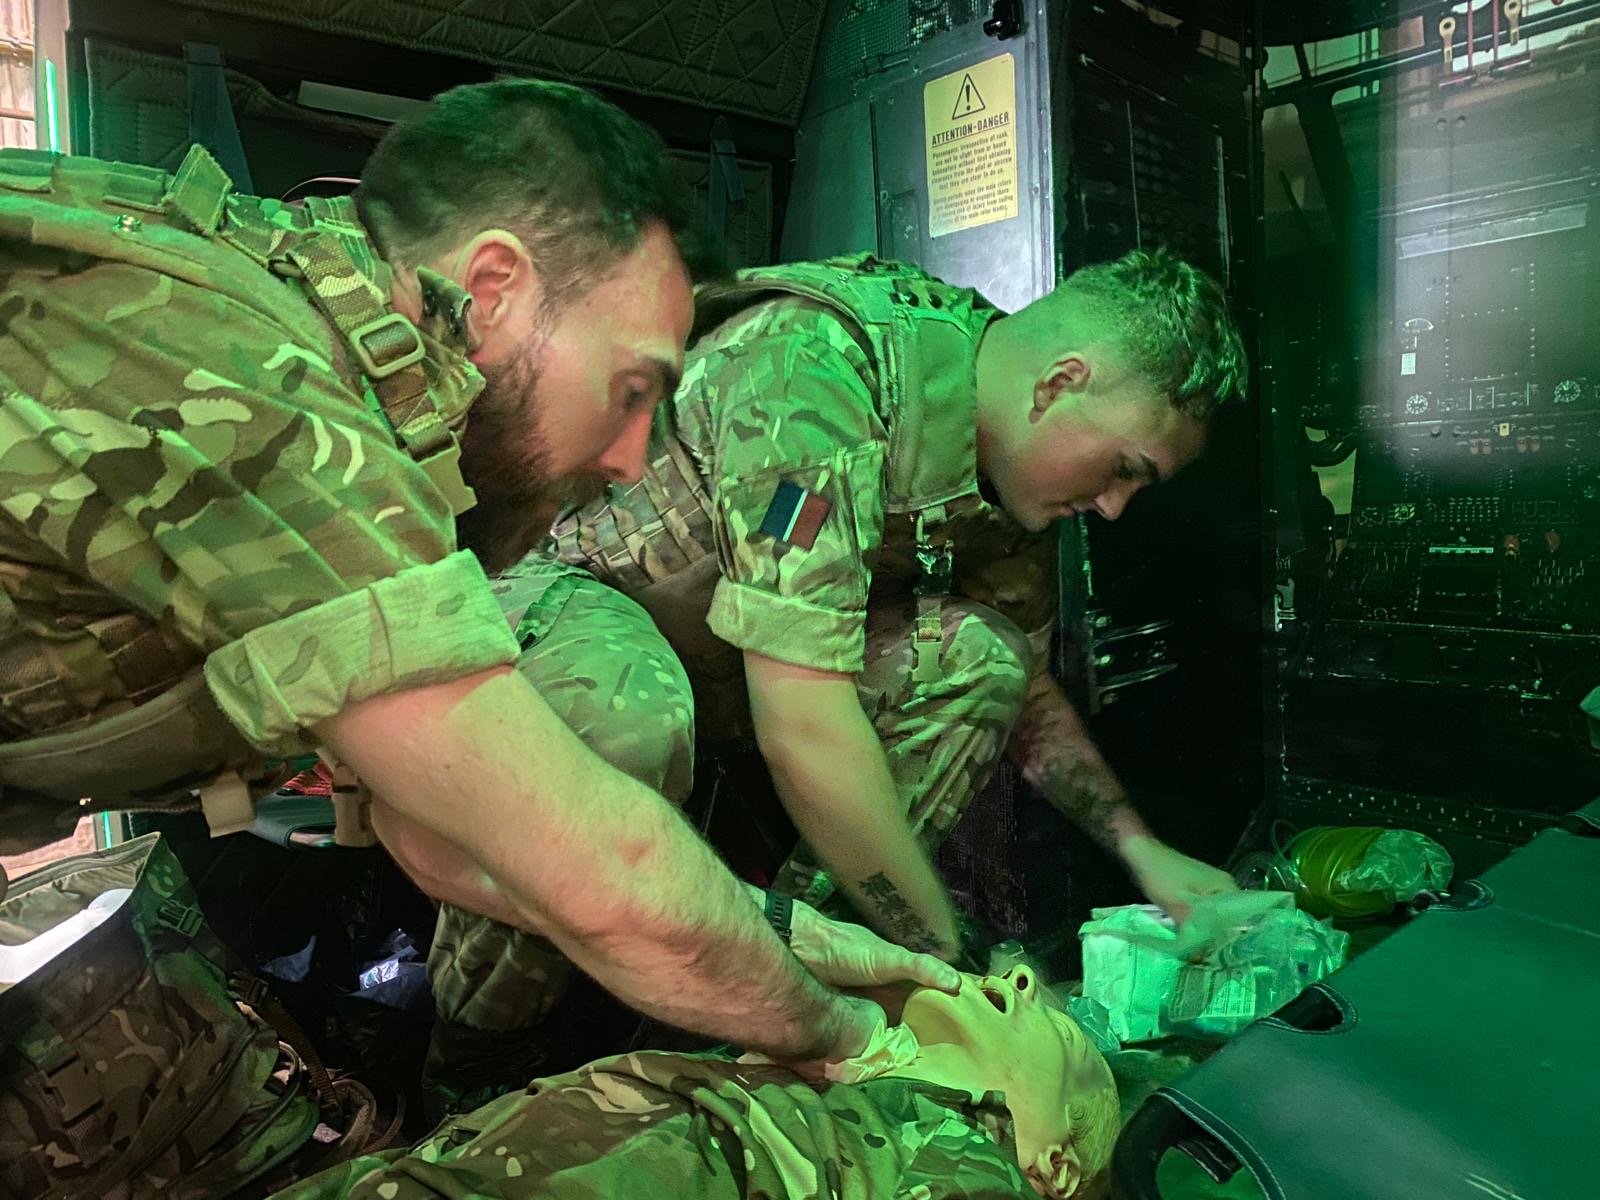 On Friday 10 May, specialist training was provided by Number 4626 Aeromedical Evacuation Squadron, focussing on Pre-Hospital Emergency Care.